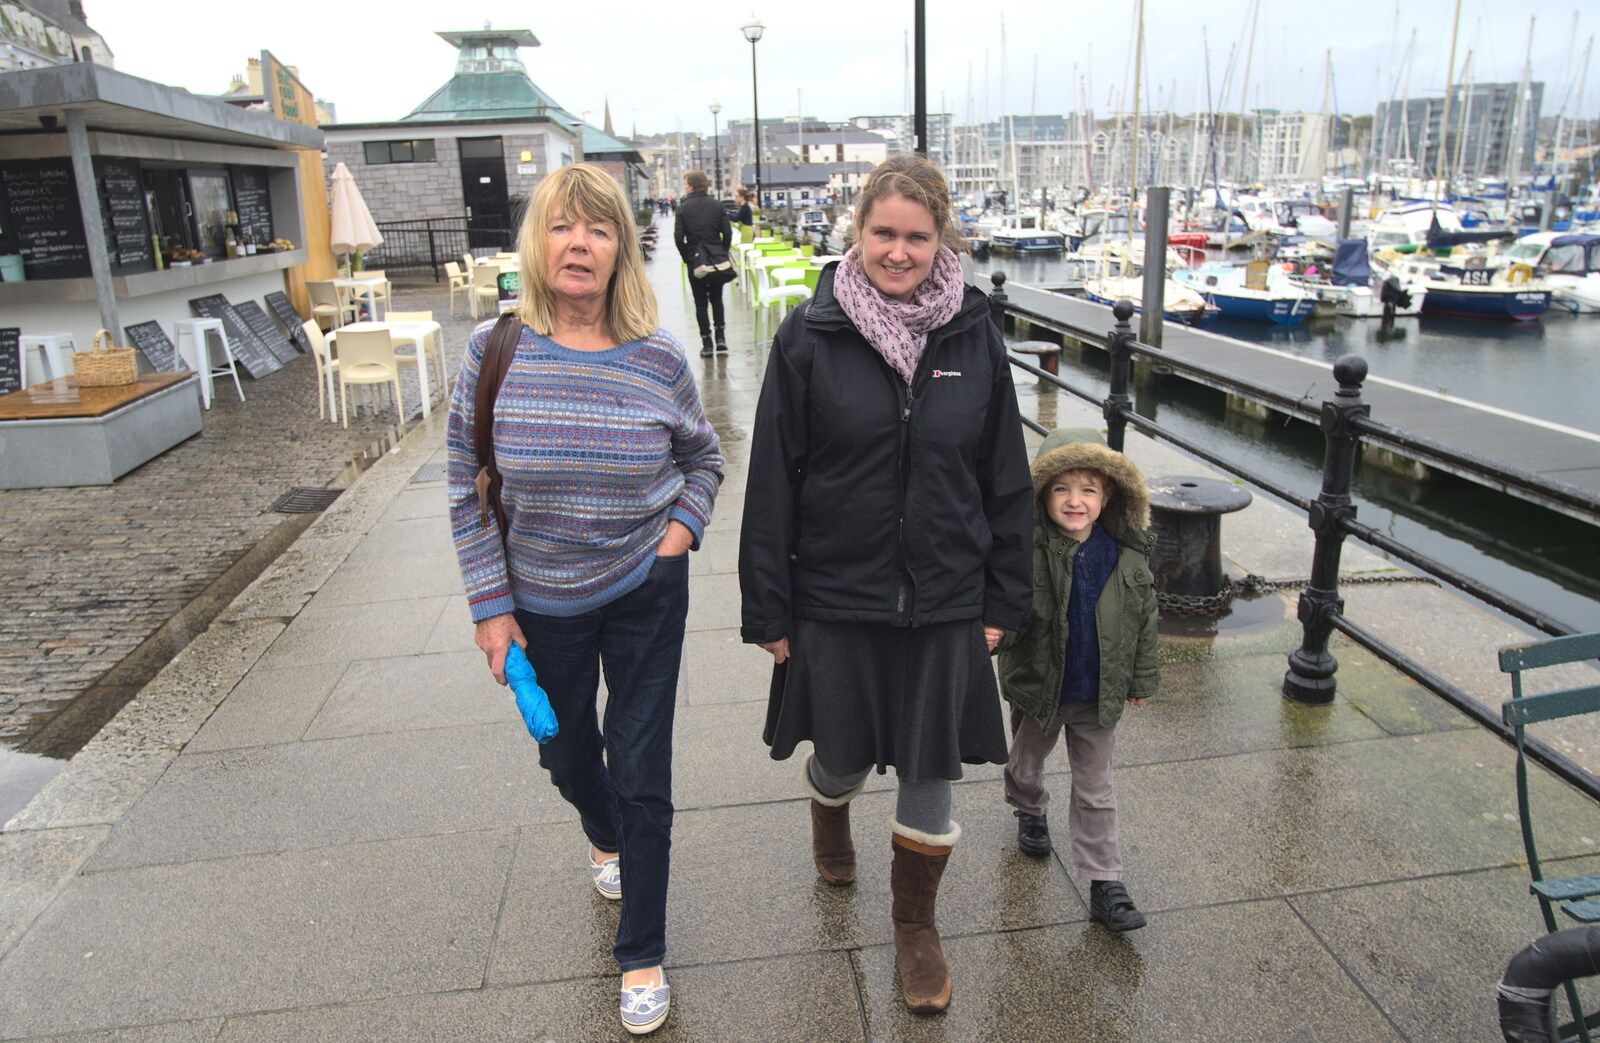 Mother, Isobel and Fred on the Barbican from A Few Days in Spreyton, Devon - 26th October 2013